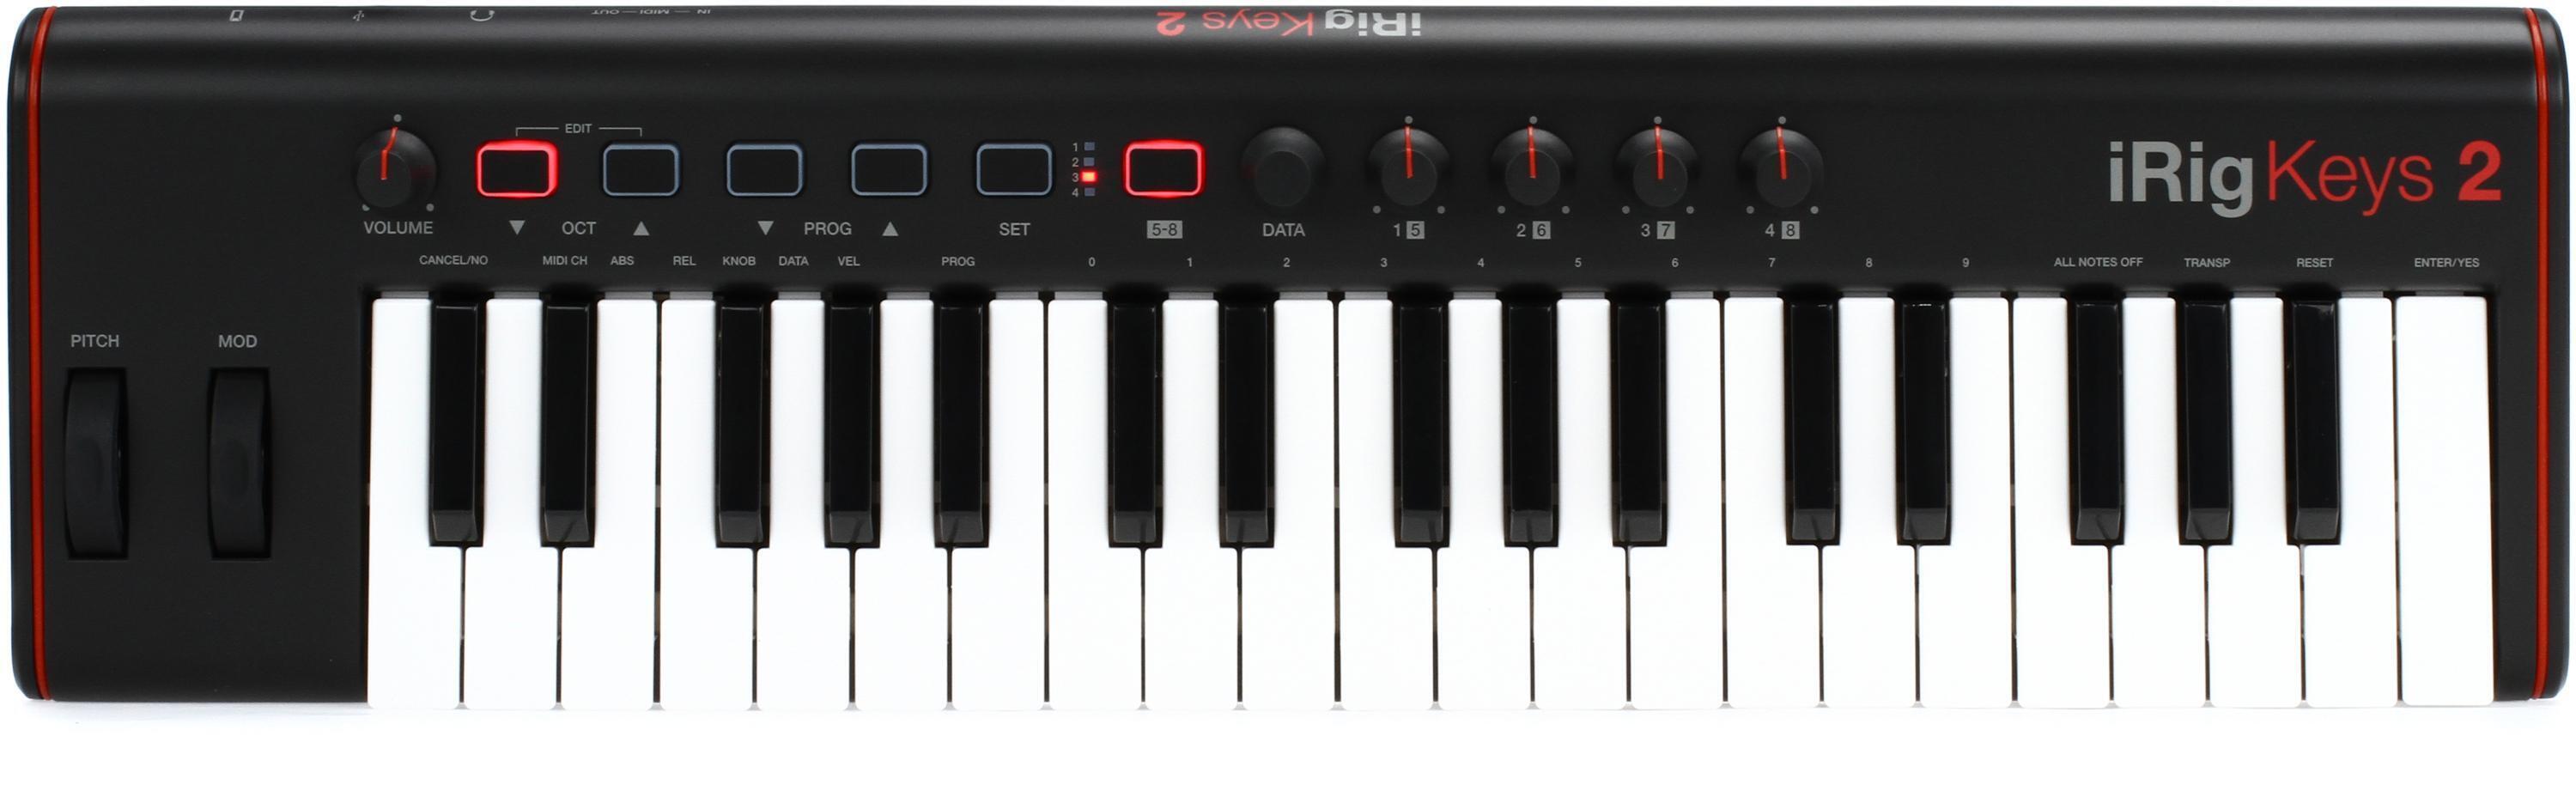 IK Multimedia iRig Keys 2 37-key Controller for iOS, Android, and Mac/PC